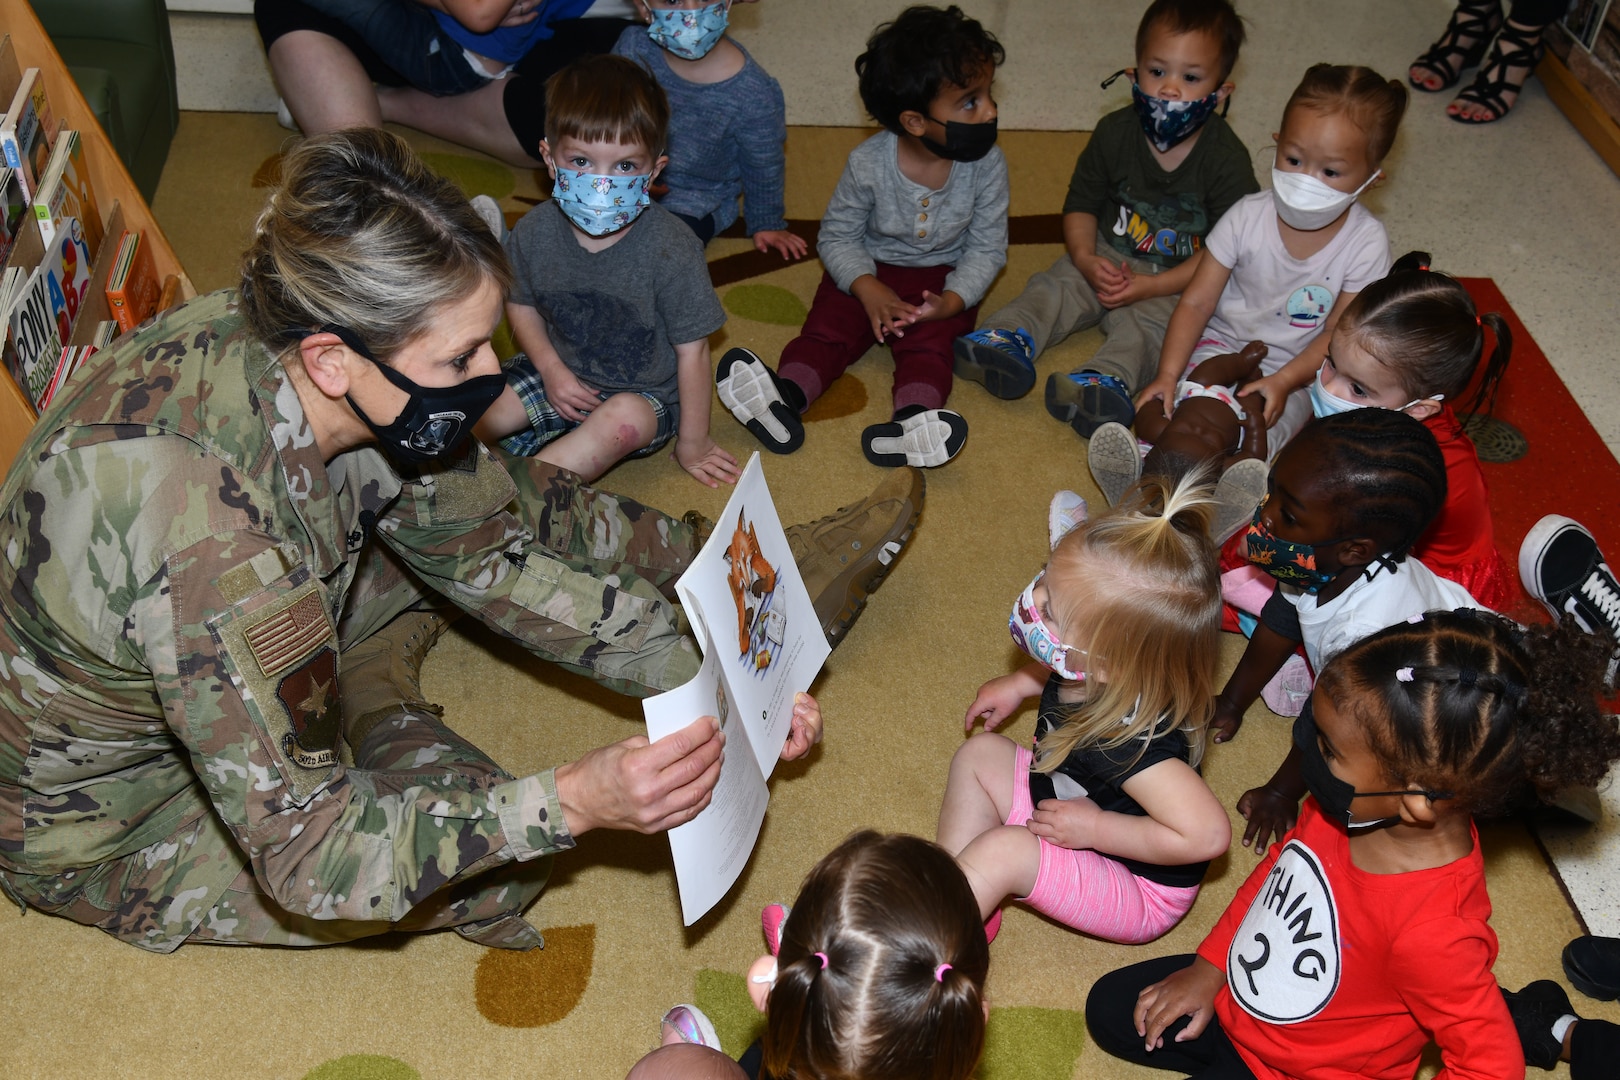 A woman in military uniform reads a book to children.